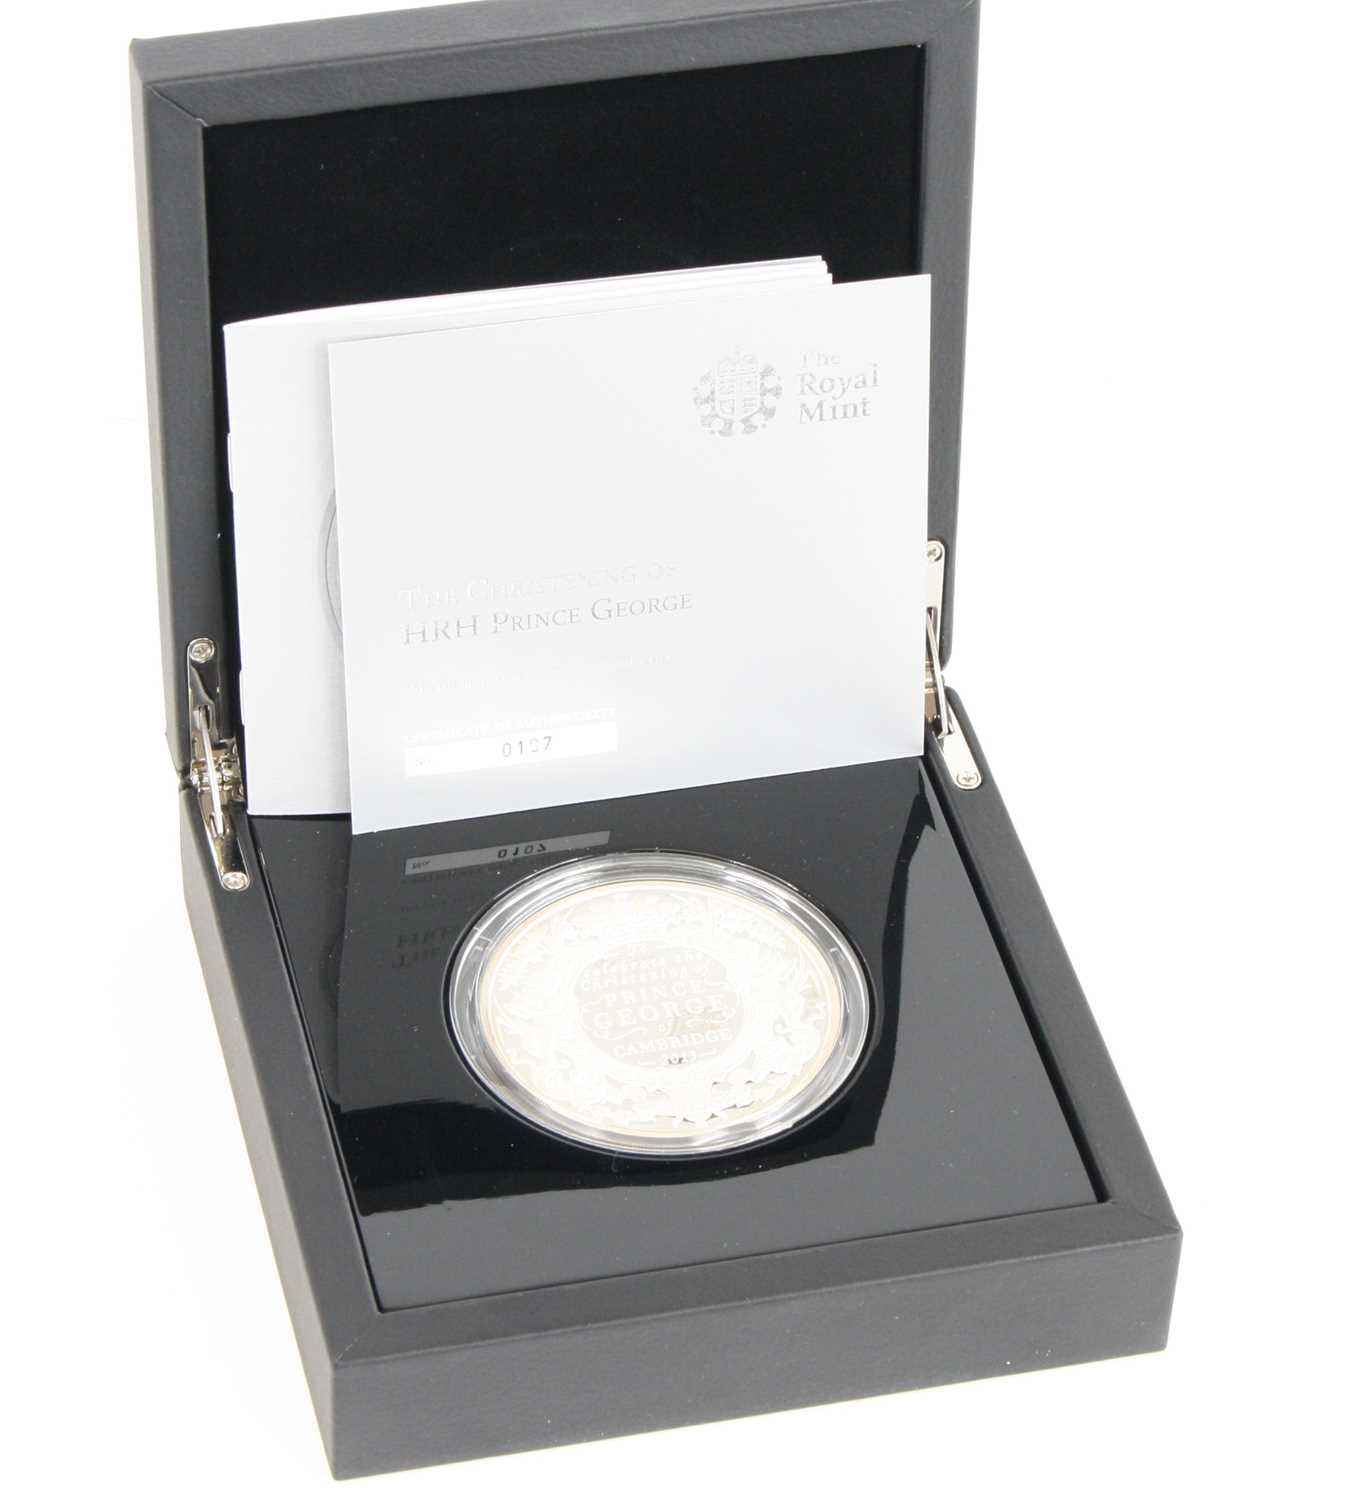 United Kingdom, The Royal Mint, The Christening of H.R.H. Prince George of Cambridge, 2013 Five-